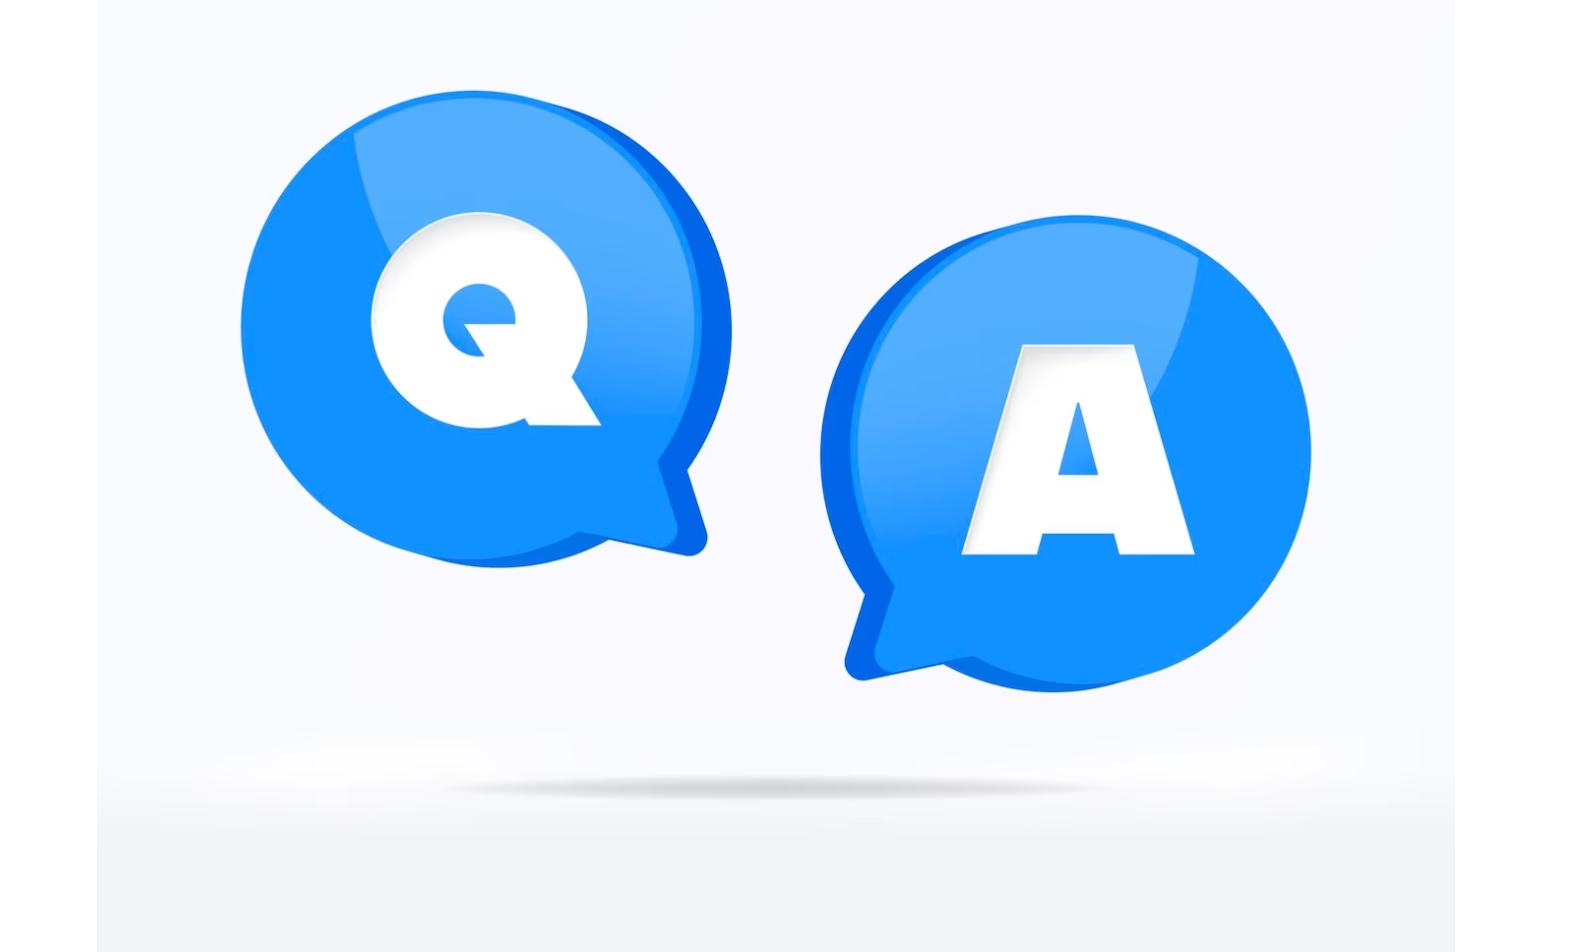 Q&A for students in virtual meetings